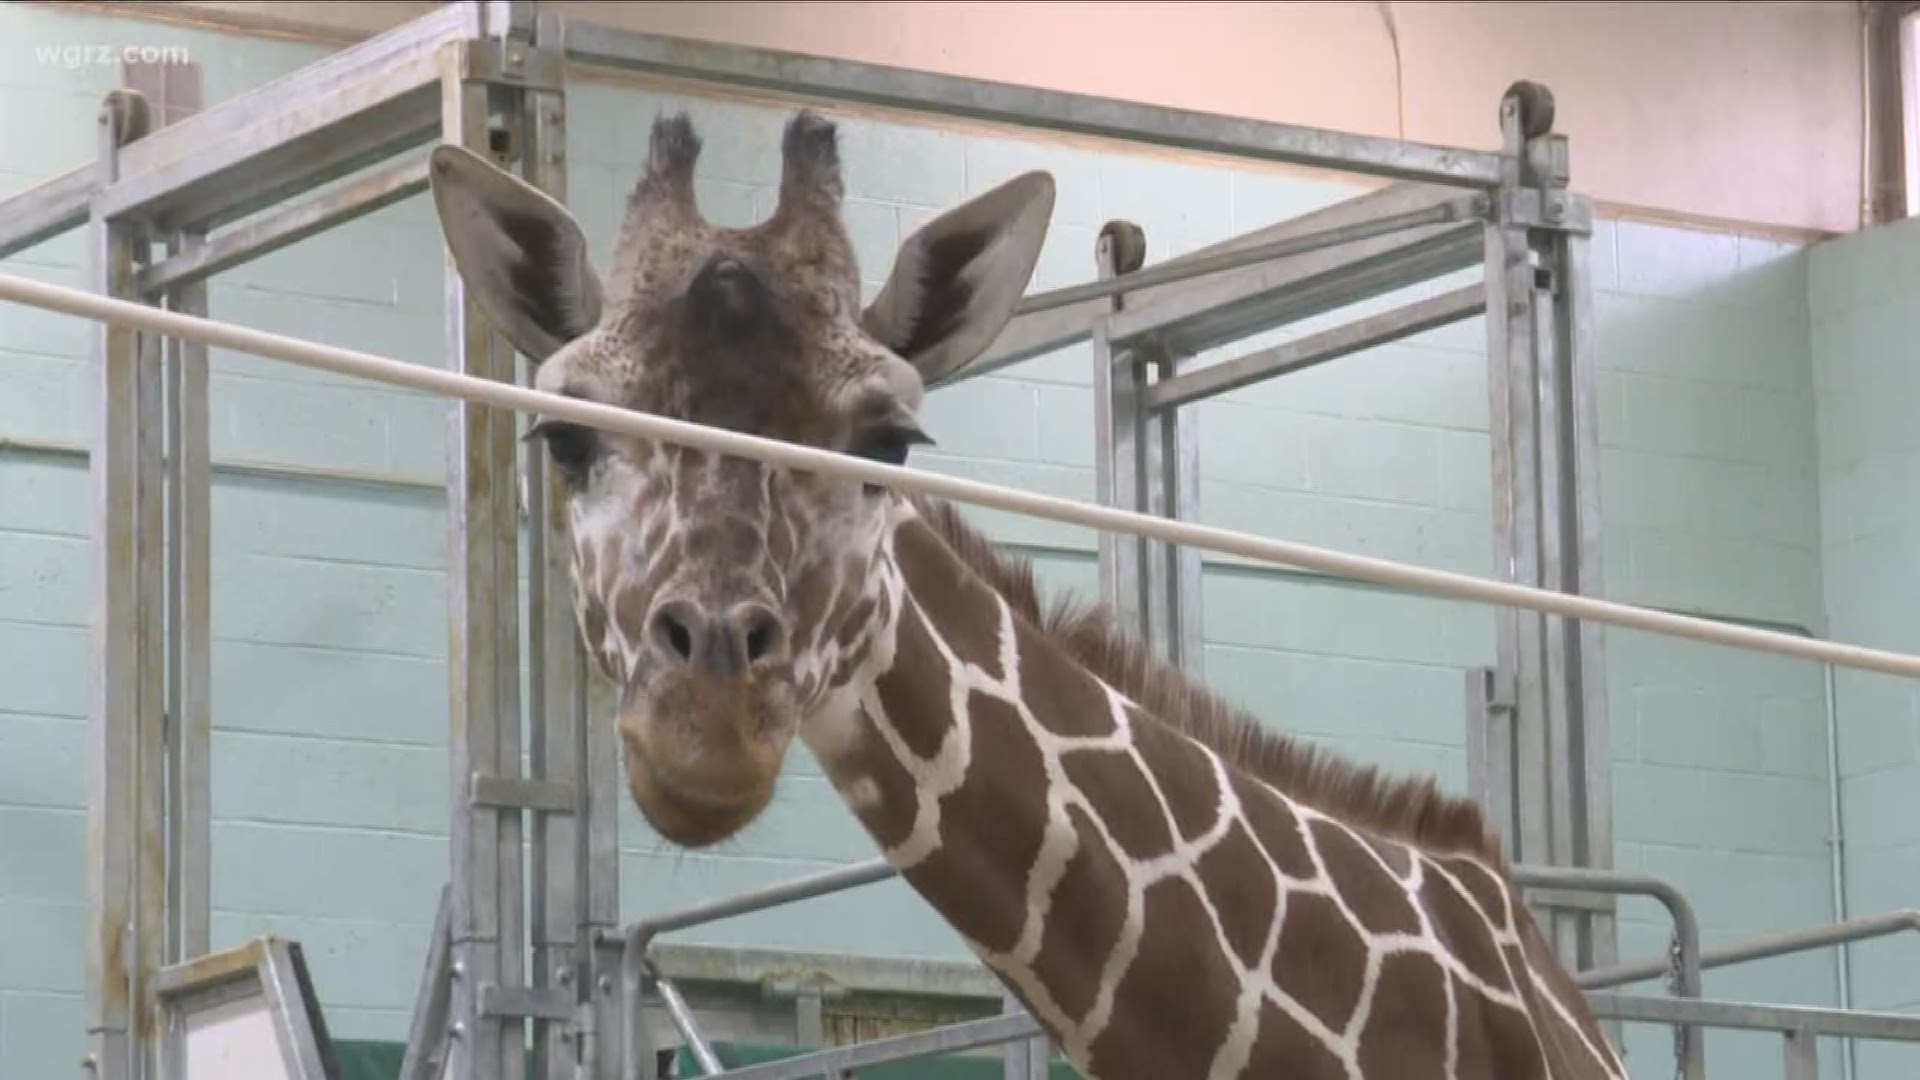 Agnes has lived at the zoo all her life- and has helped to increase the giraffe population.